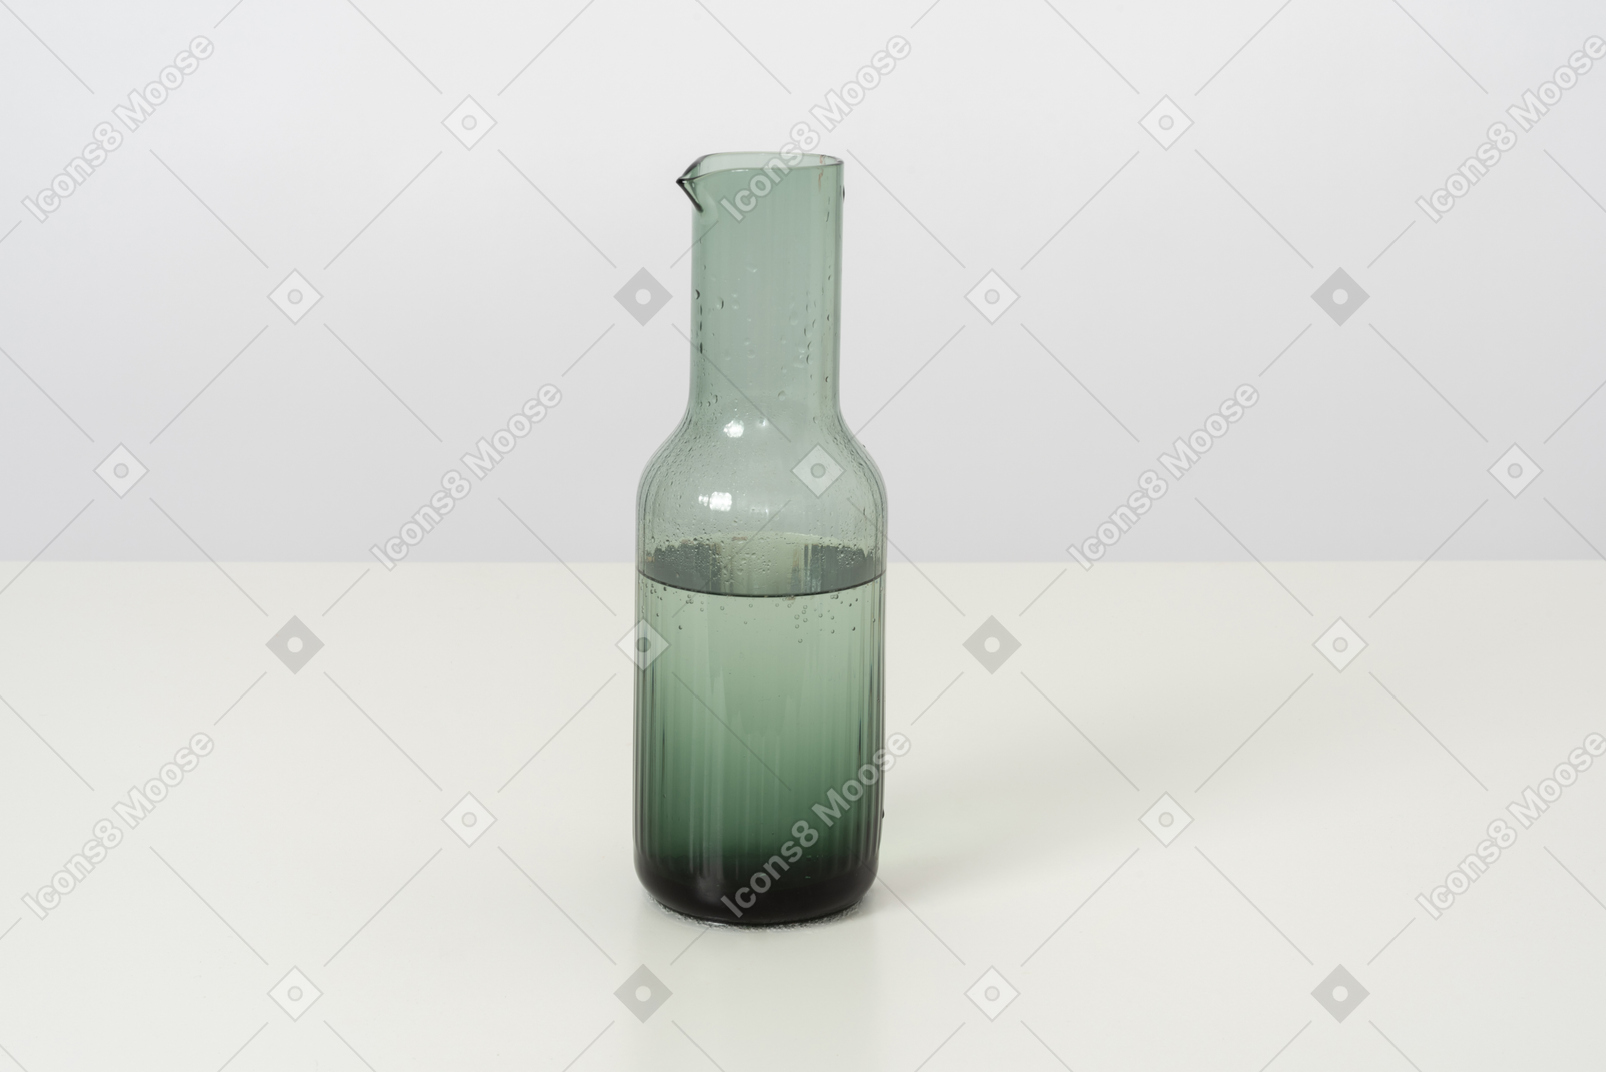 A glass bottle of cold water, designed in a simple style and form